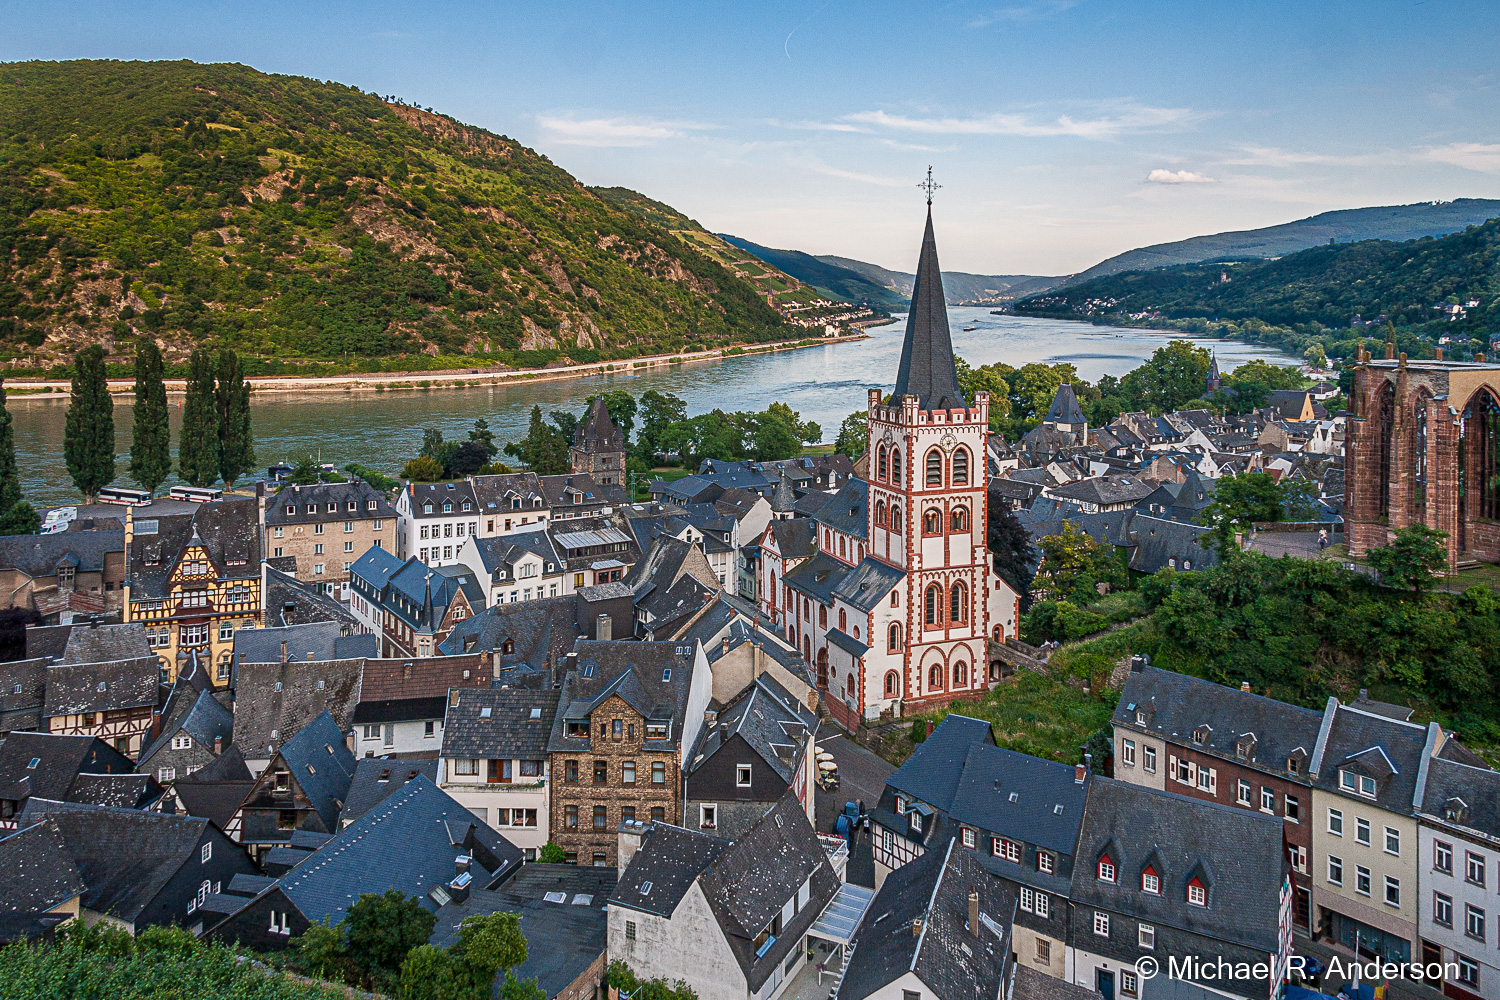 The town of Bacharach on the Rhine River